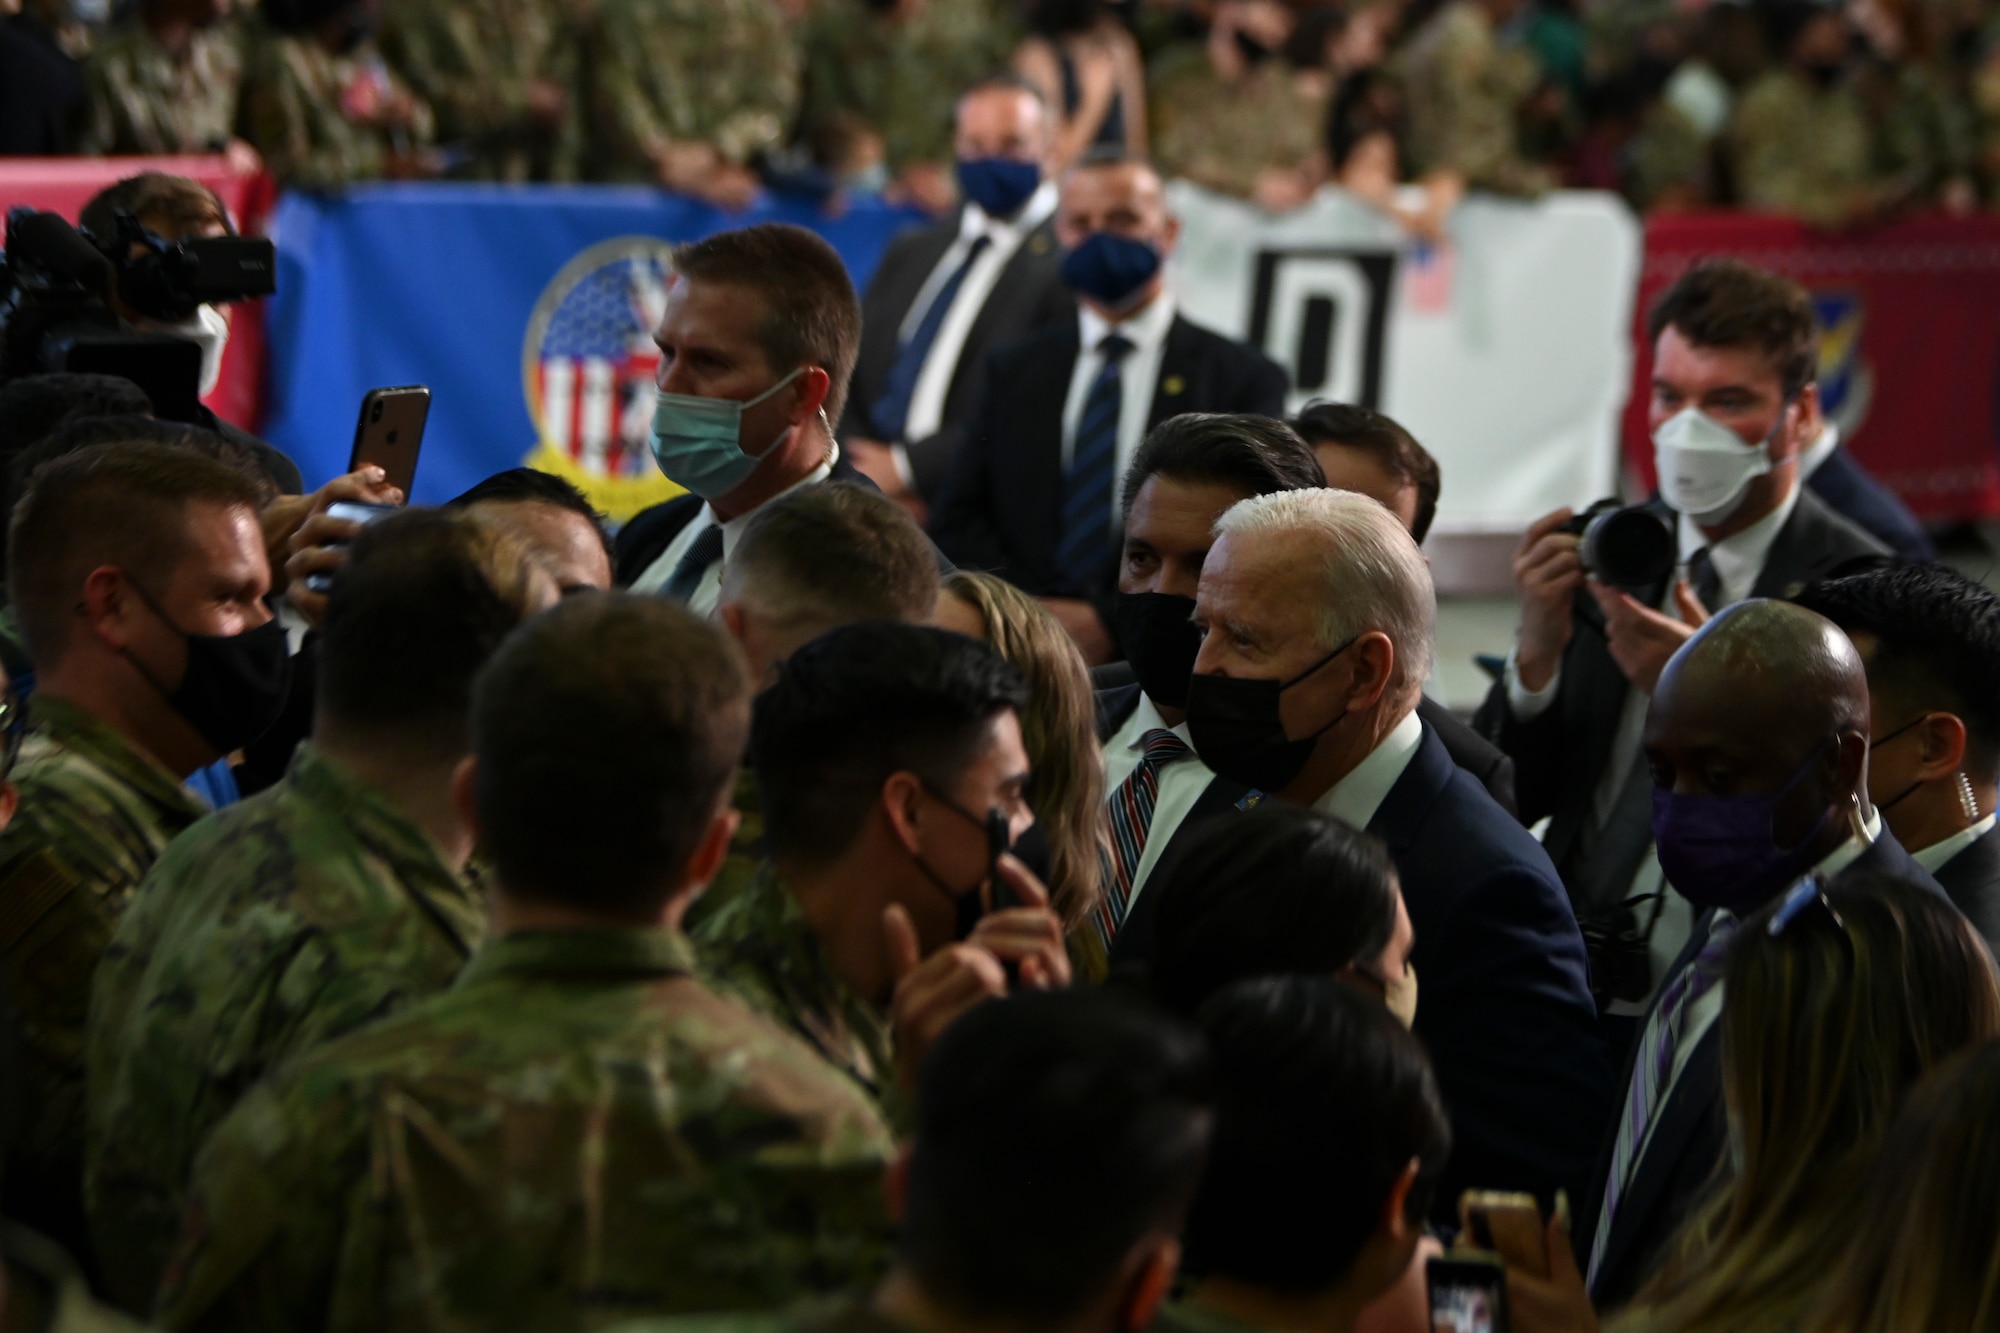 President Joe Biden shakes hands with members of the tri-base area at Royal Air Force Mildenhall, United Kingdom, June 4, 2021.